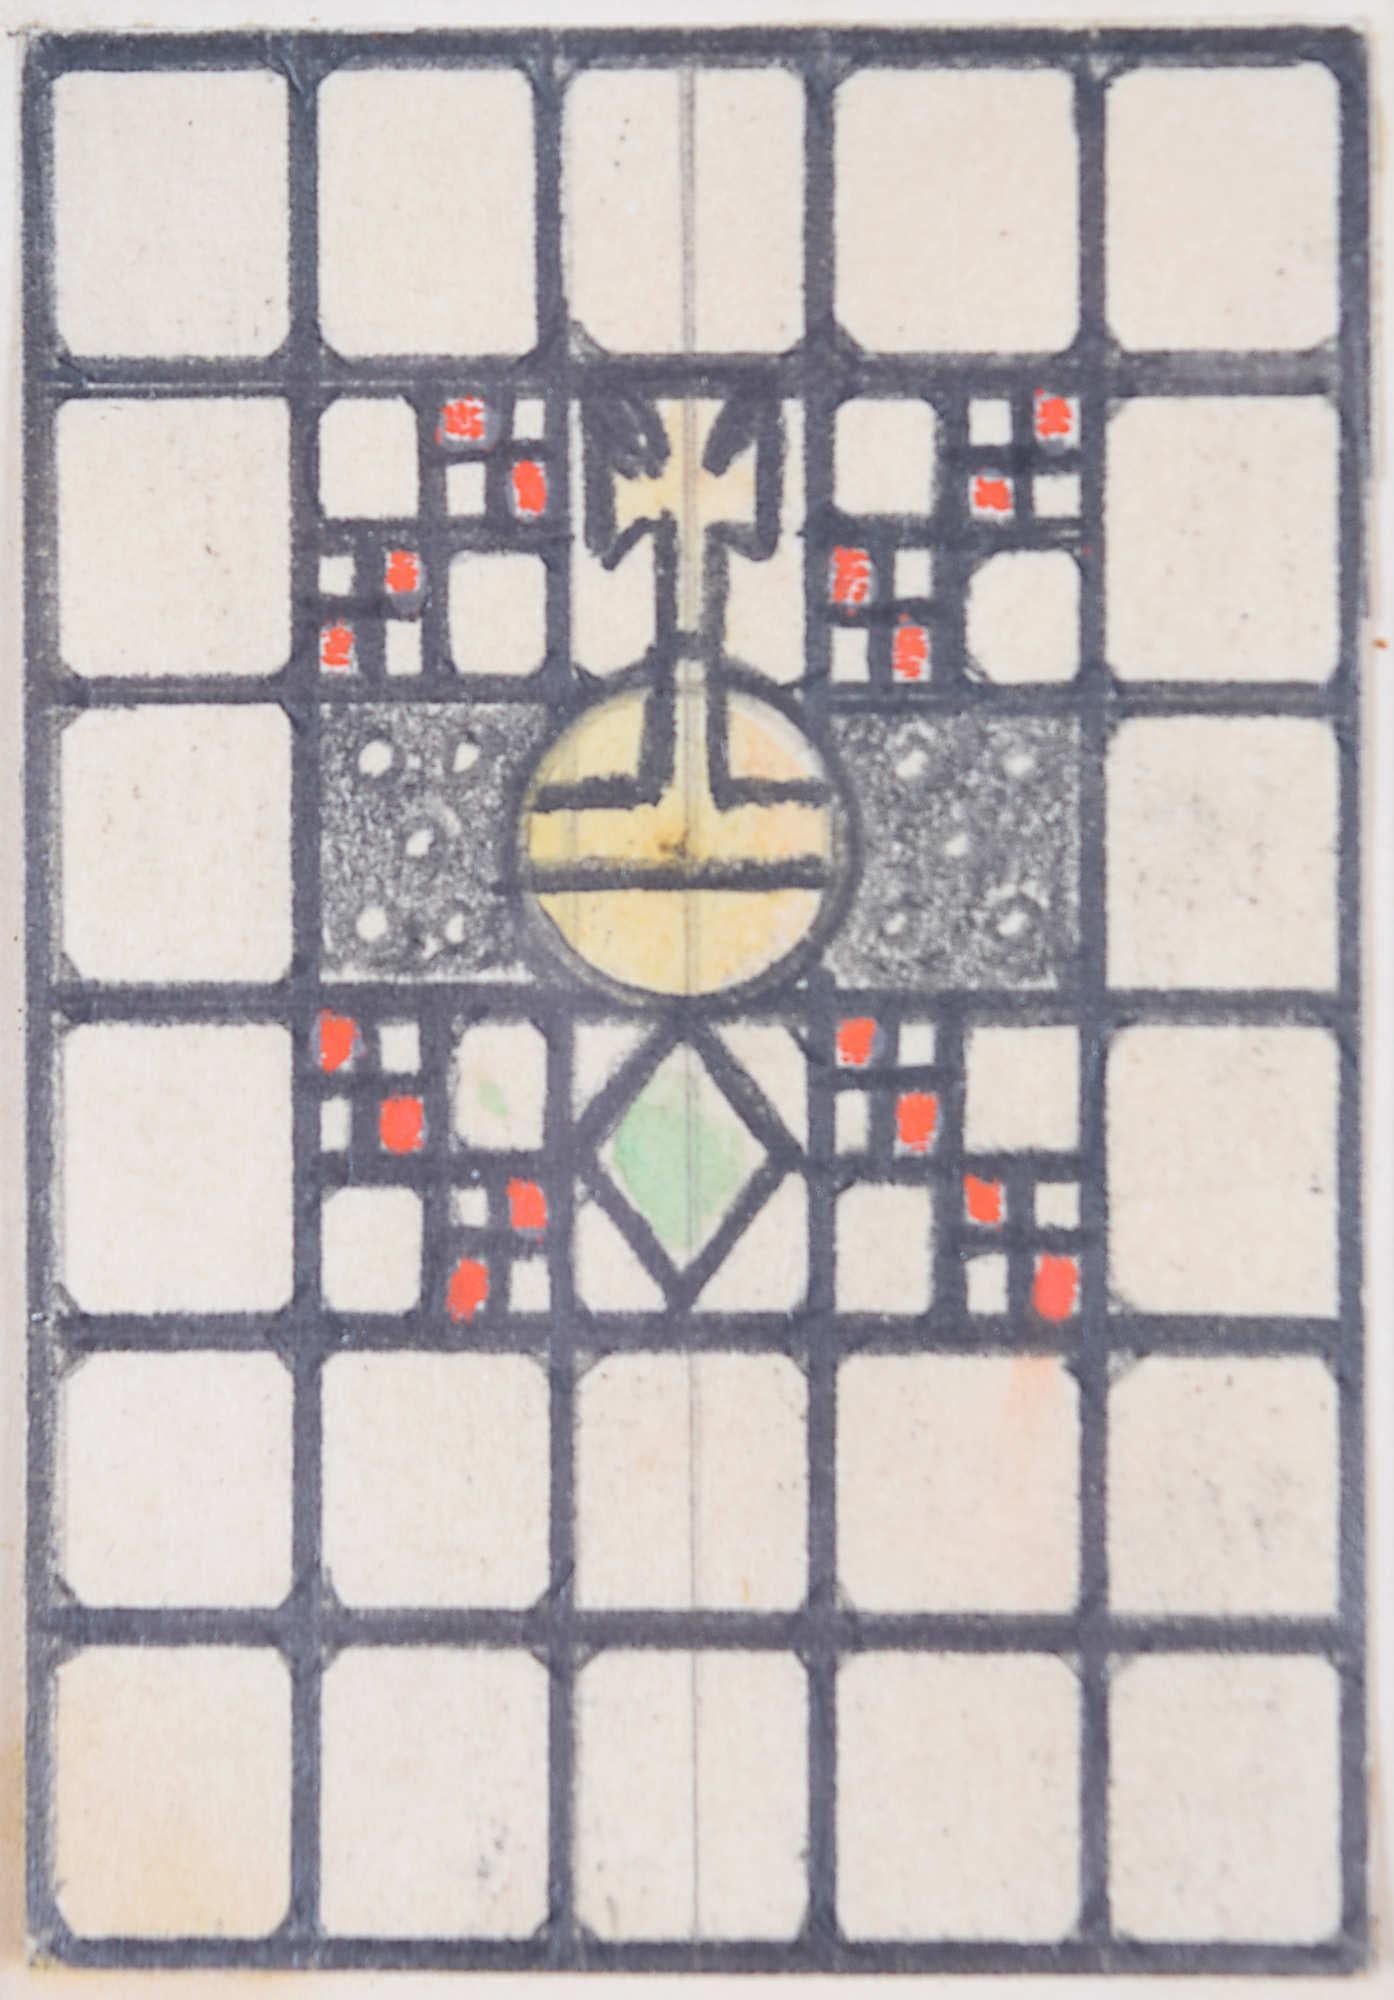 Search for, or send us a message us about, our other stained glass designs, Modern Britsh Art and T W Camm designs by Florence Camm

Florence Camm (1874-1960)
Design for stained glass window with orb and cross
Watercolour 
7x5 cm
Design for TW Camm